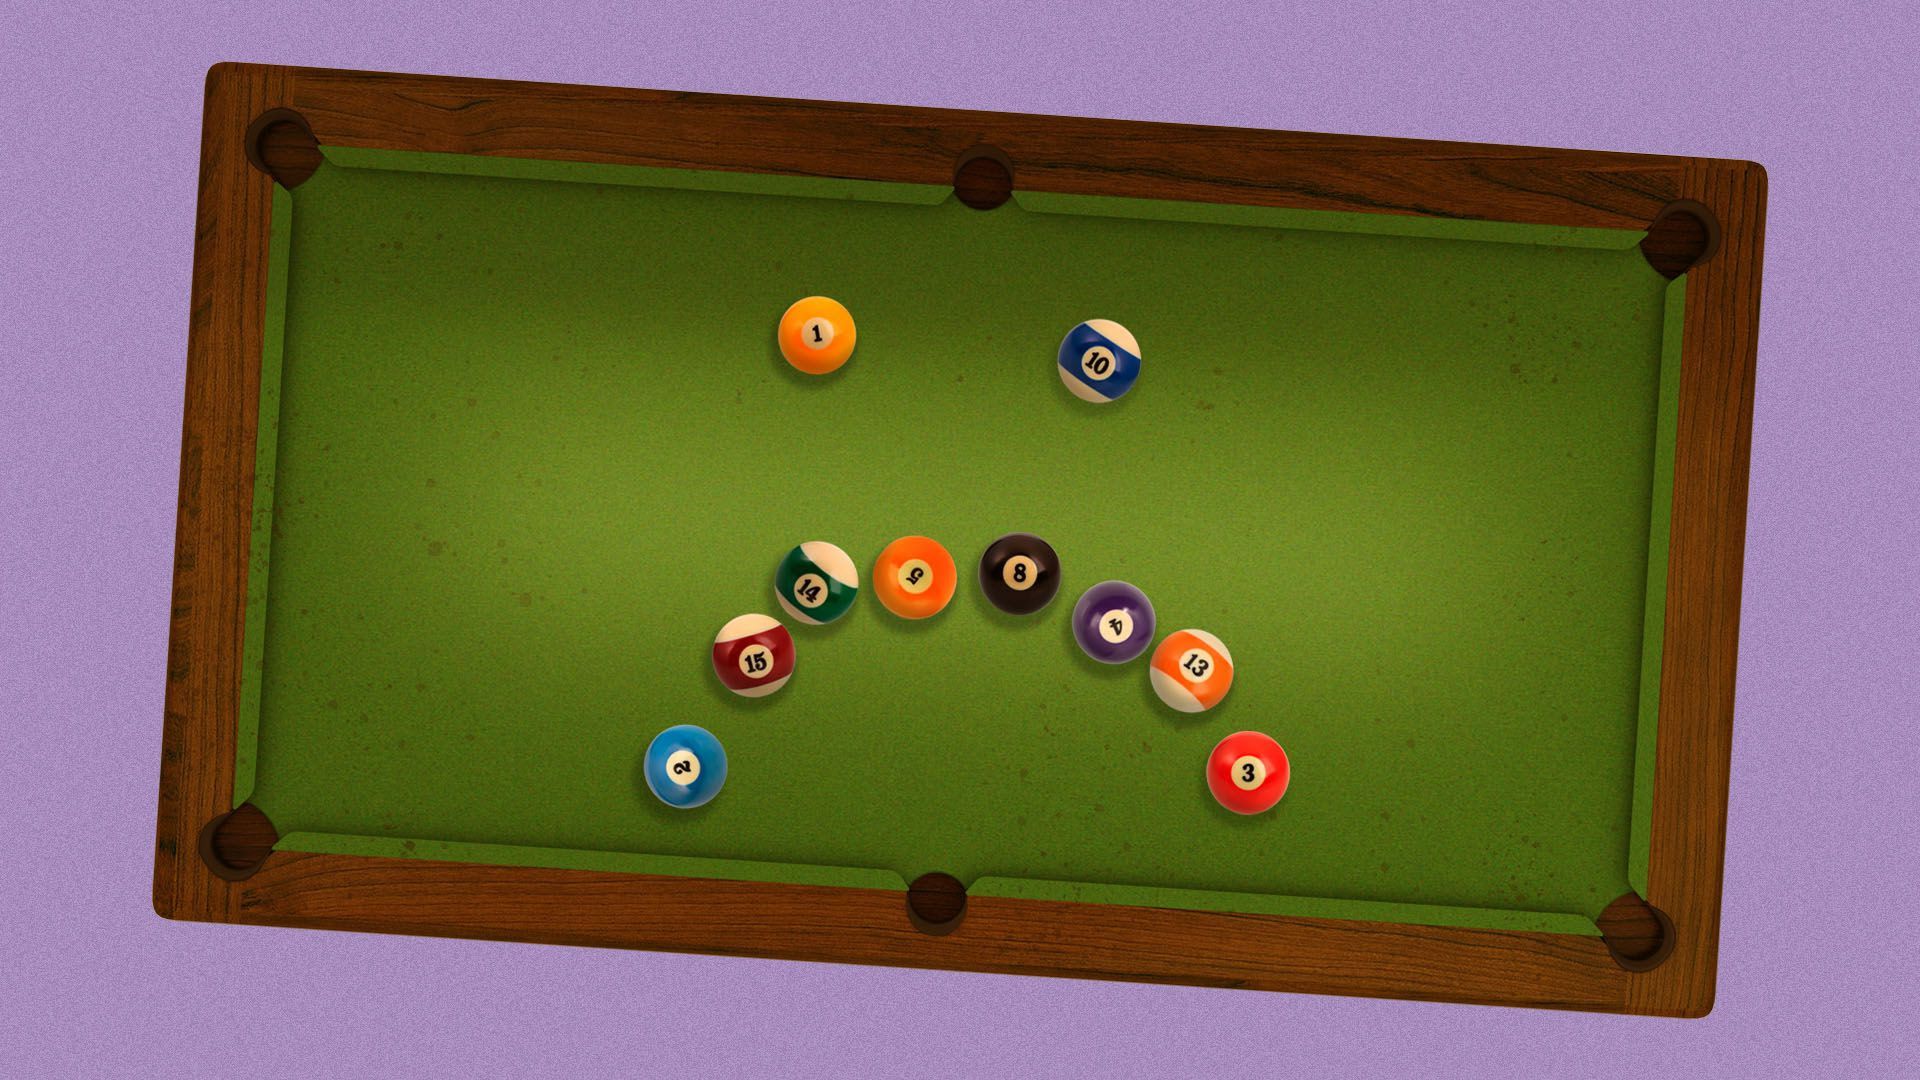 Illustration of pool balls in the shape of a frown